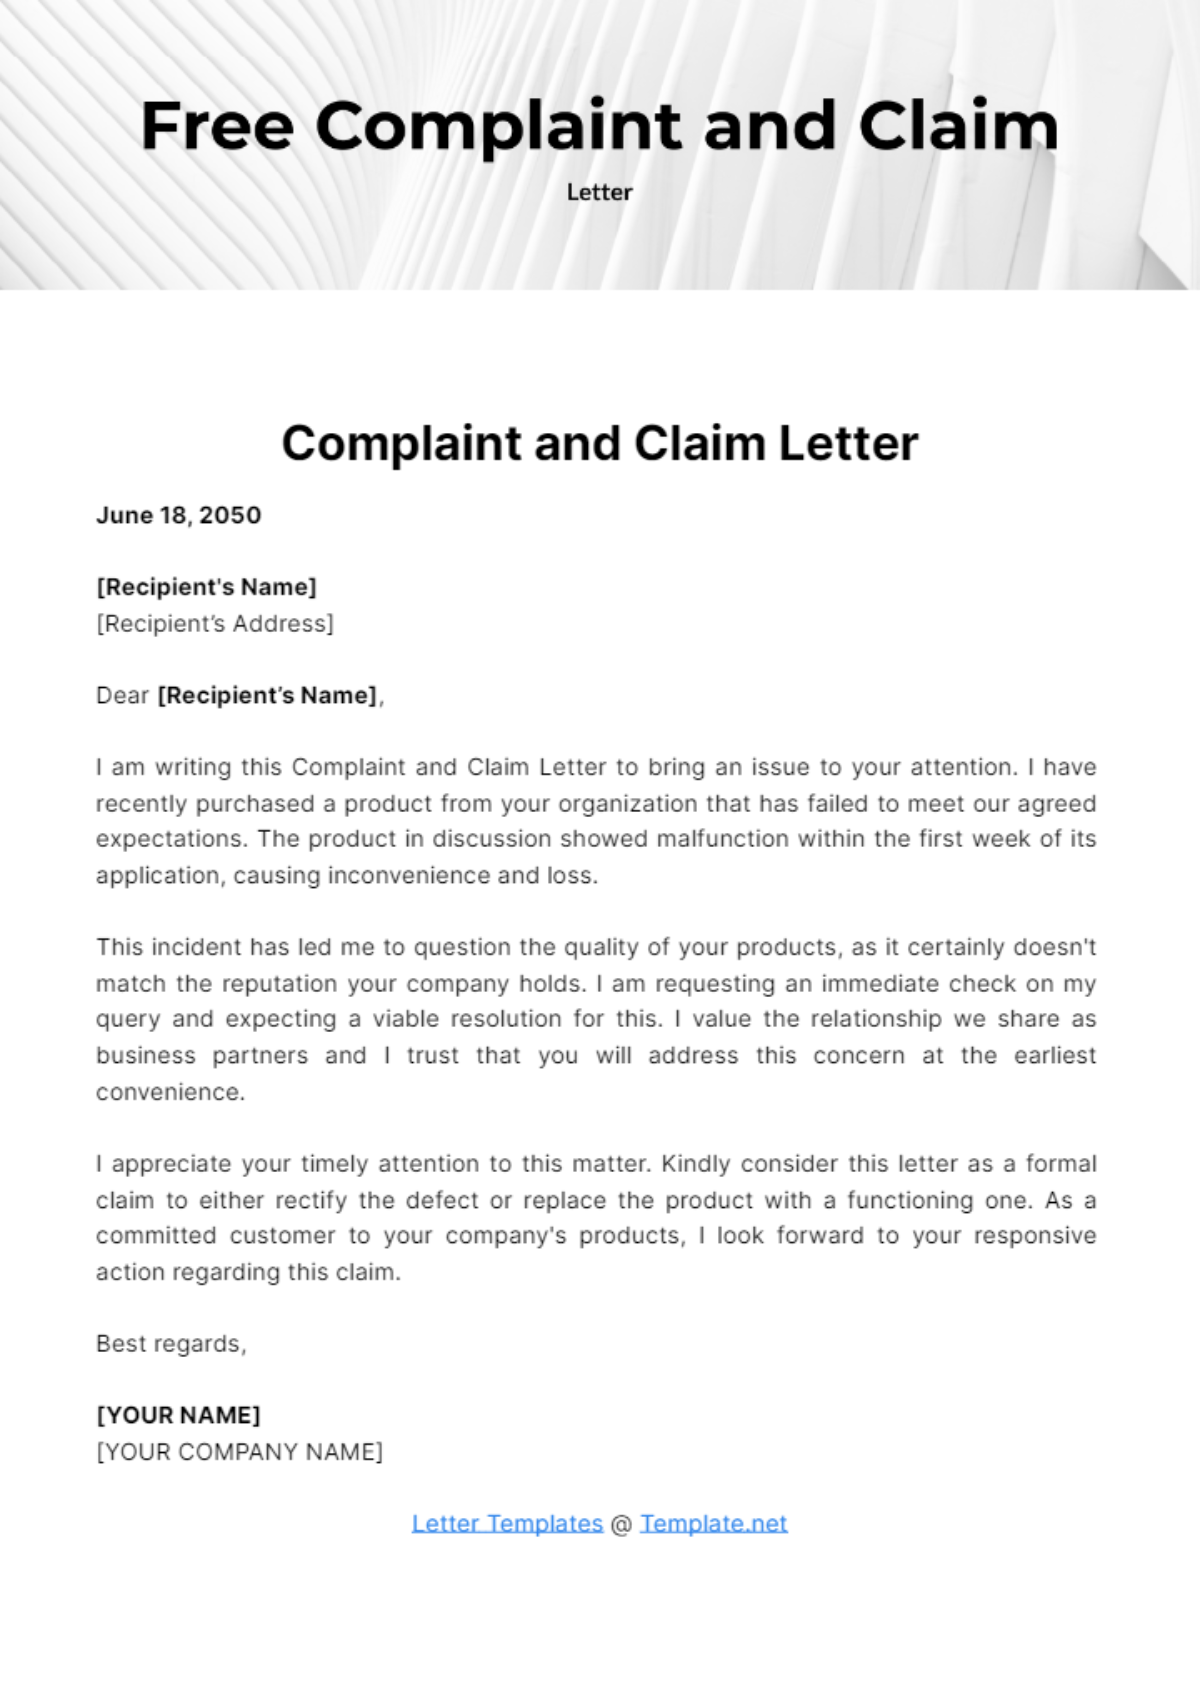 Free Complaint and Claim Letter Template